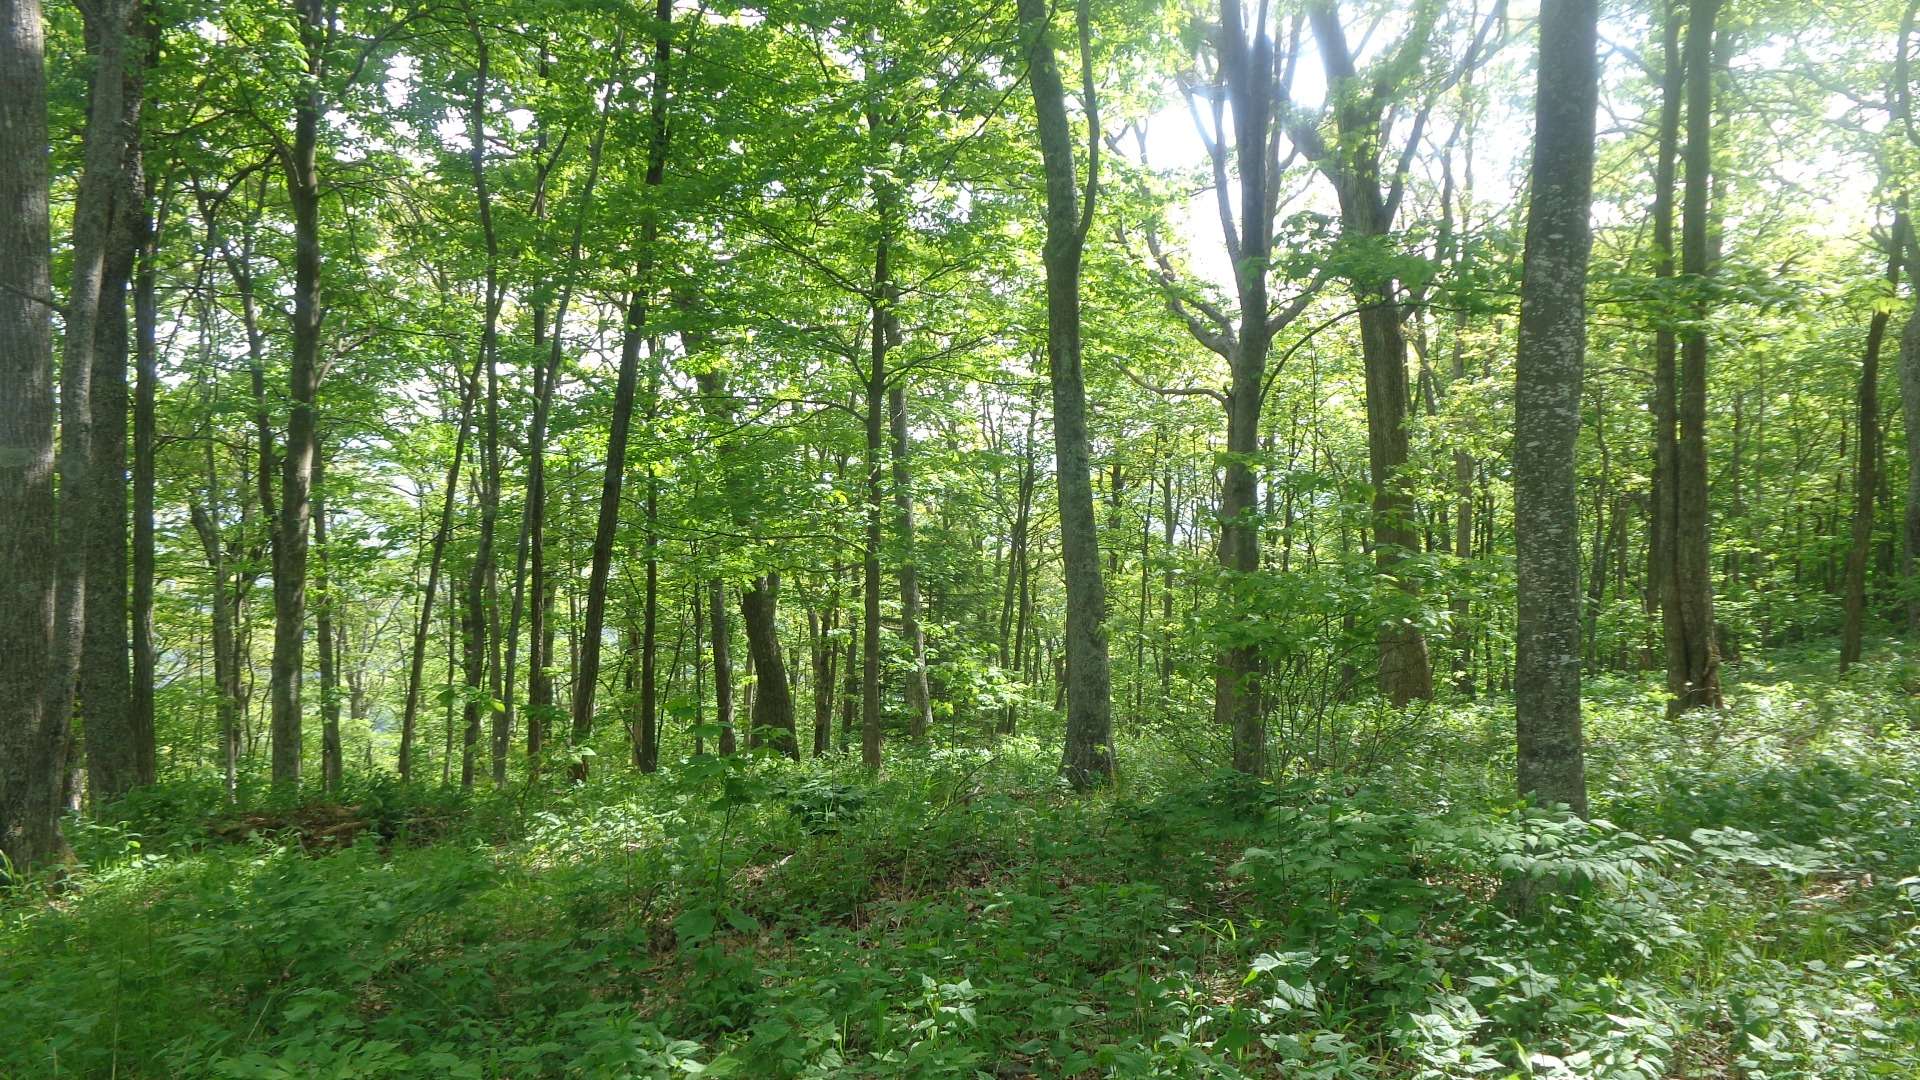 Lot 12, a gorgeous wooded 0.548 acre home site, is now available and offers an ideal location for your private NC Mountain home.  The Shire at Phoenix includes an architectural review committee to ensure standards that will protect and enhance your investment. <b> Lot 12 is offered at only $29,000.   H278 </b>